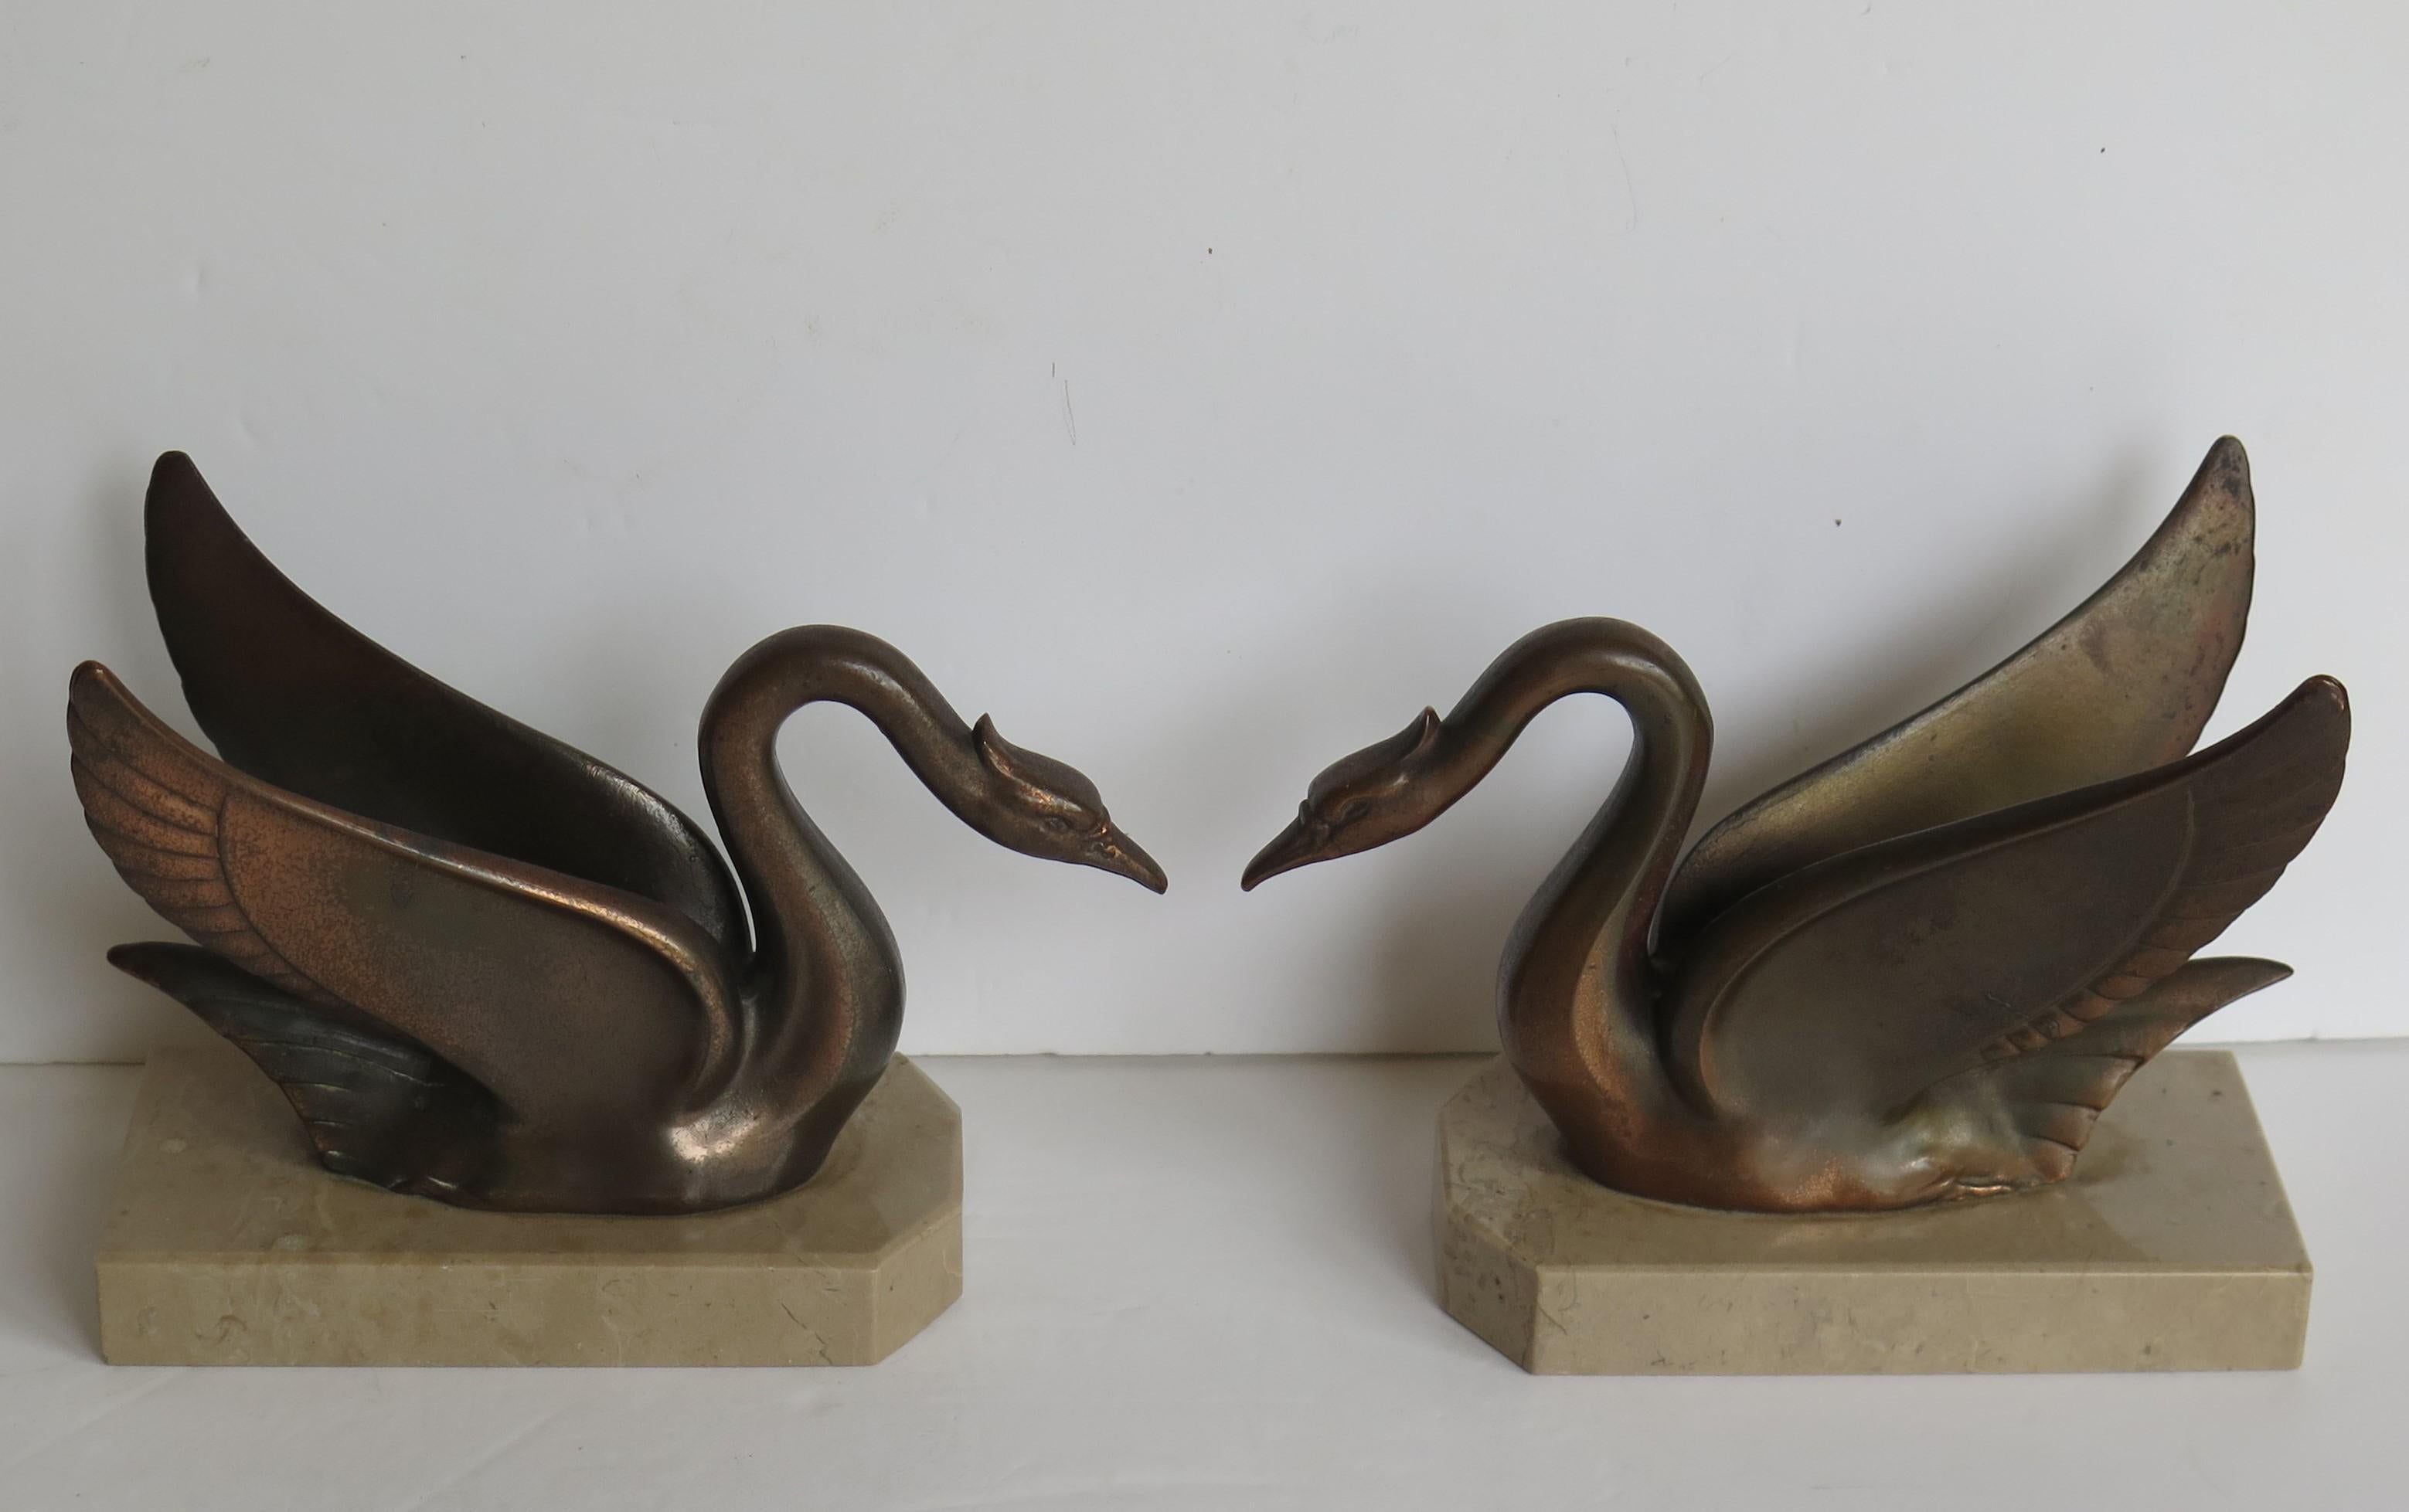 20th Century Art Deco Bookends Swans Bronzed Metal on Beige Marble Bases, French, circa 1930 For Sale